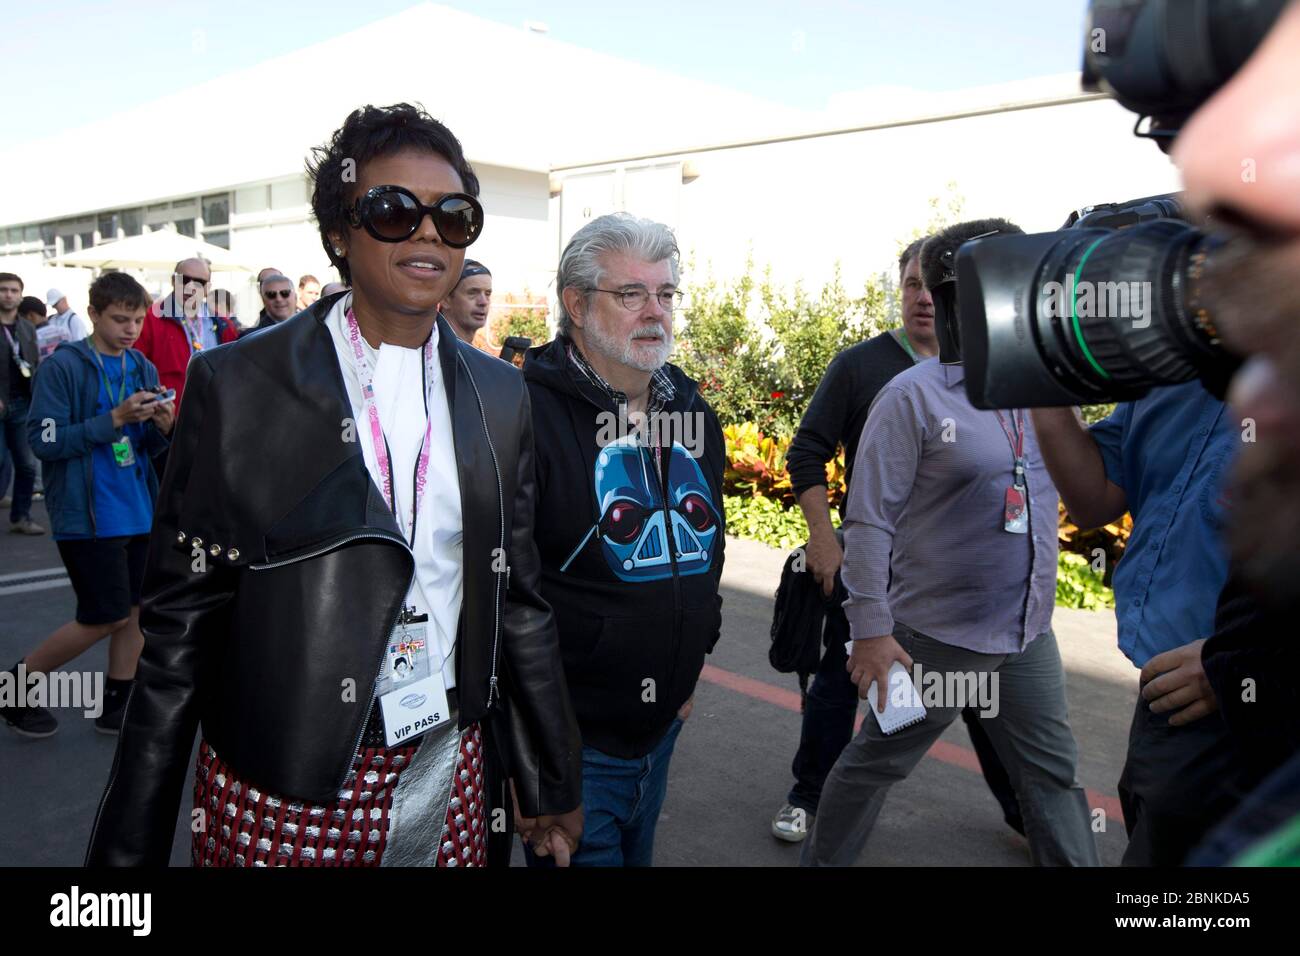 Austin Texas USA, November 18, 2012: Director and  filmmaker George Lucas (c) with girlfriend Mellody Hudson (l) in the celebrity-packed paddock area at the Circuit of the Americas race track prior to the inaugural Formula One United States Grand Prix. ©Bob Daemmrich Stock Photo